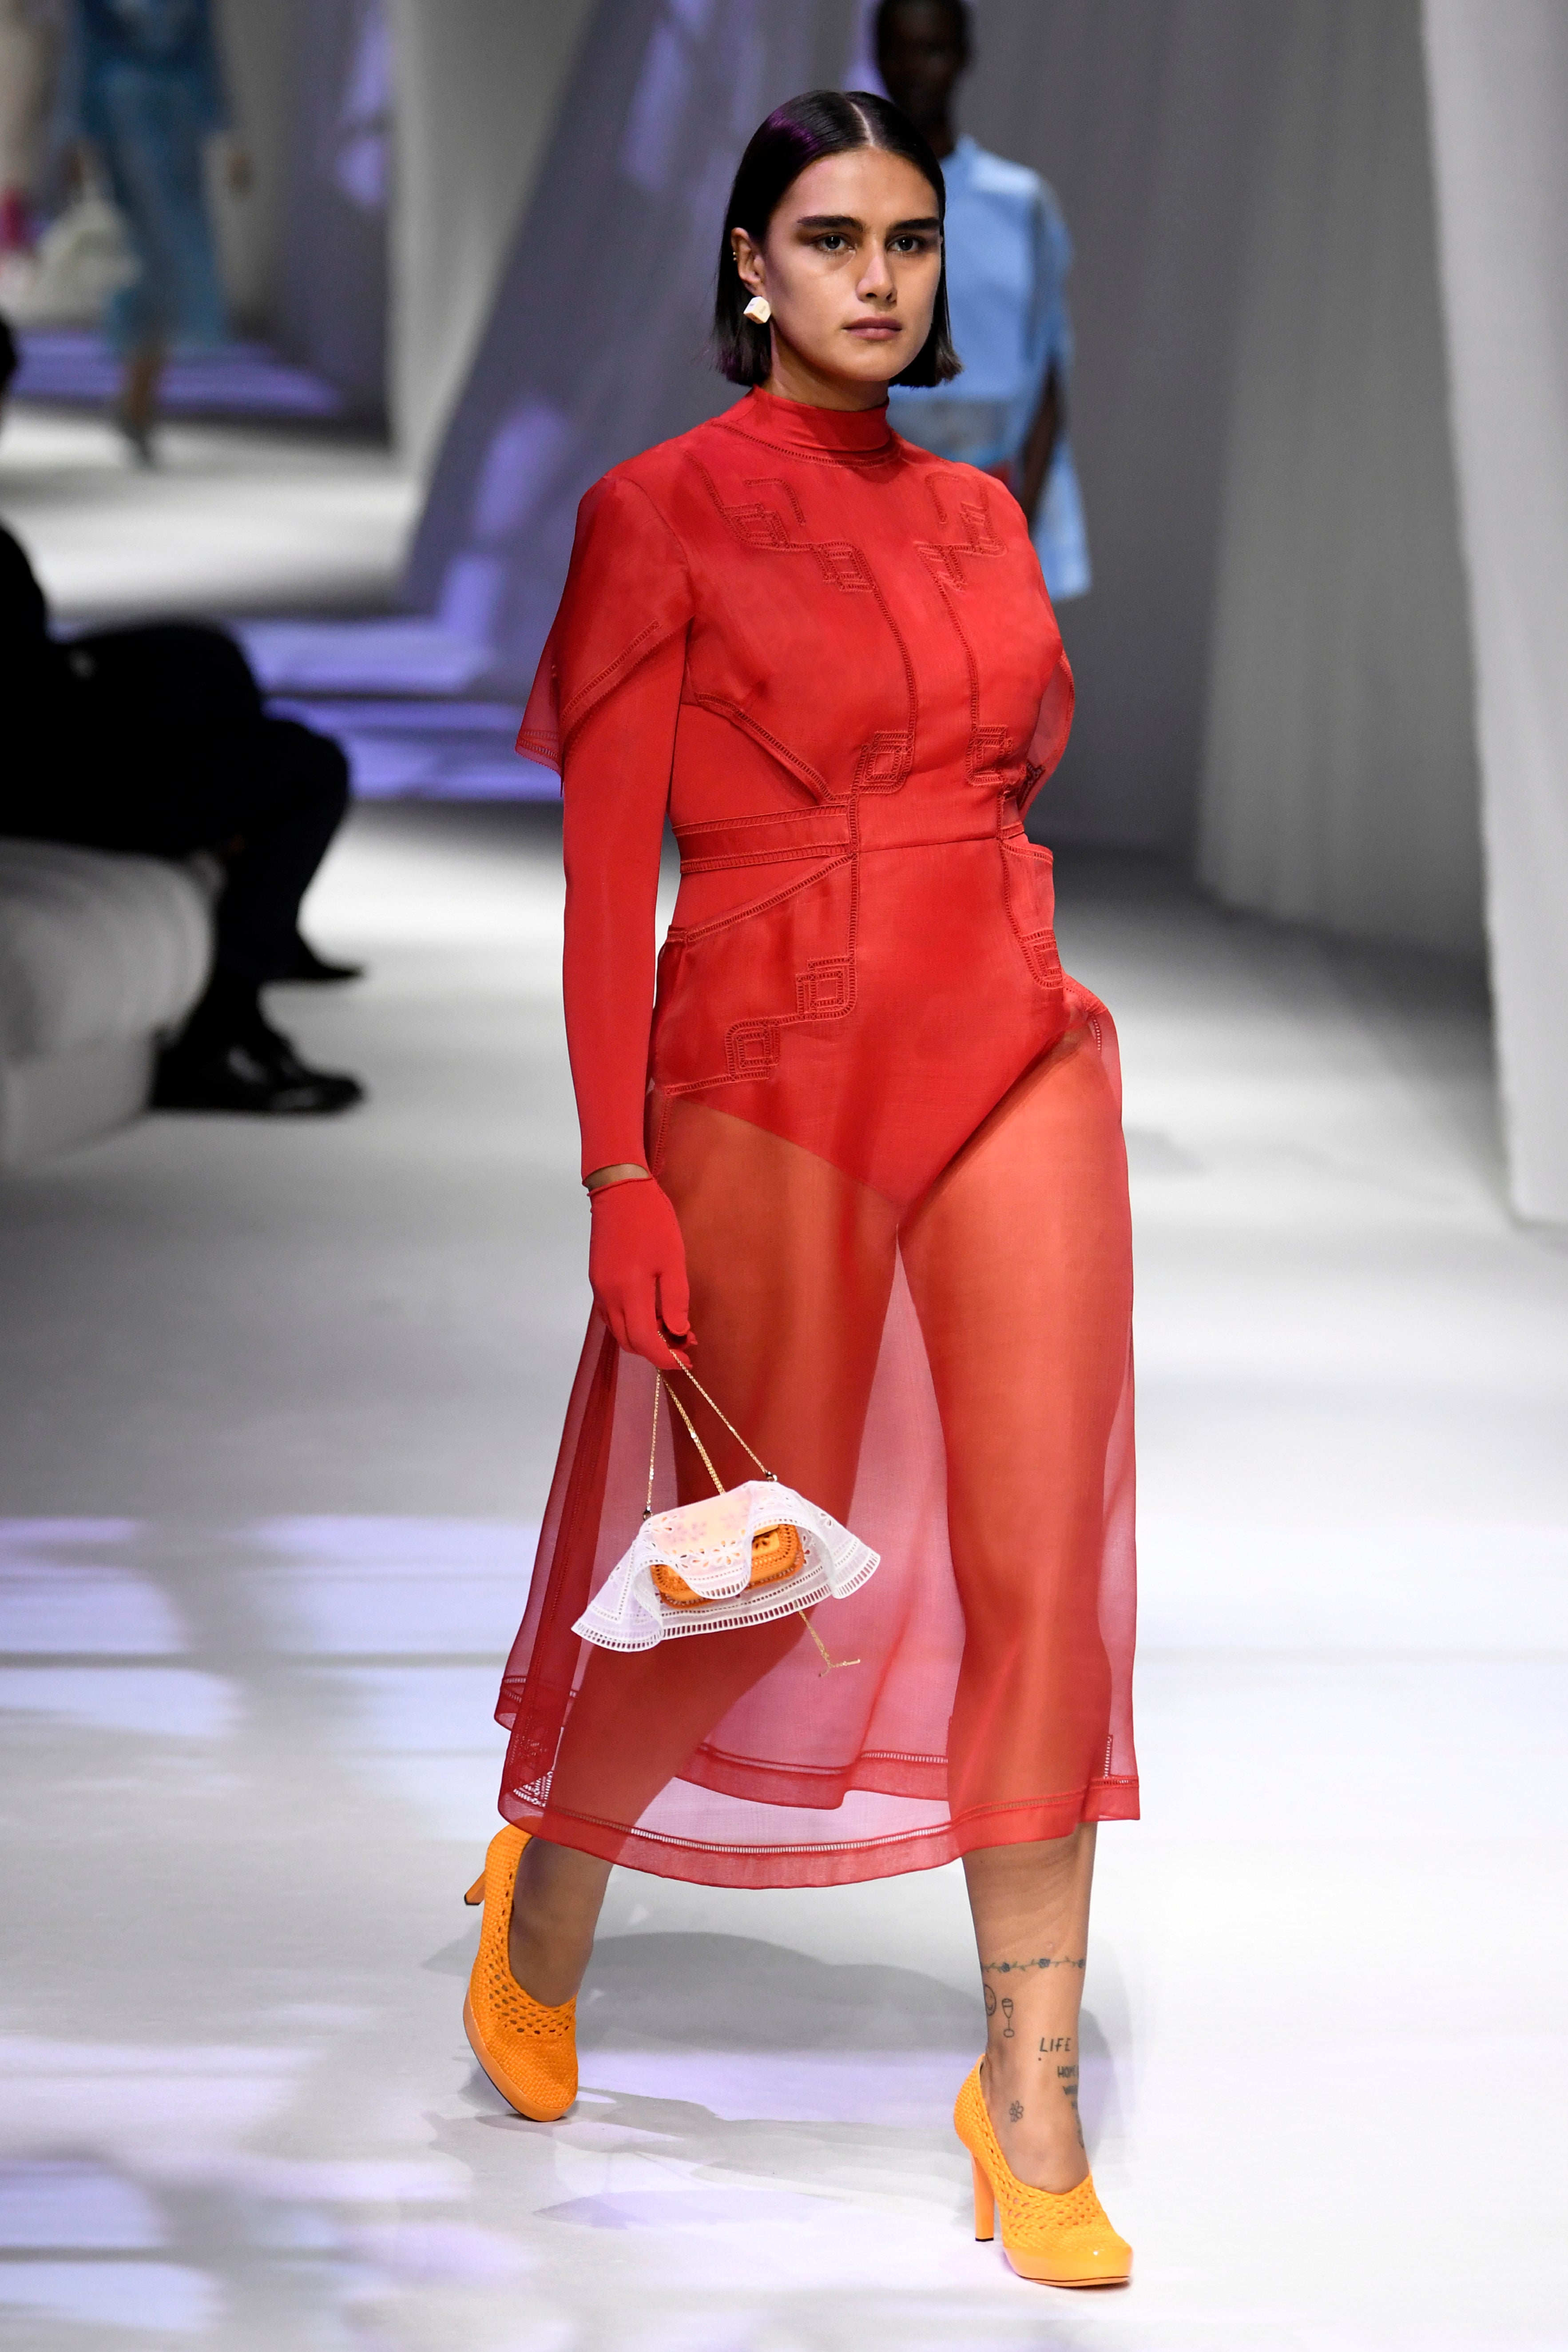 Sustainable Trends, Emilio Pucci Autumn Winter 2020 - 2021 Ready-to-Wear